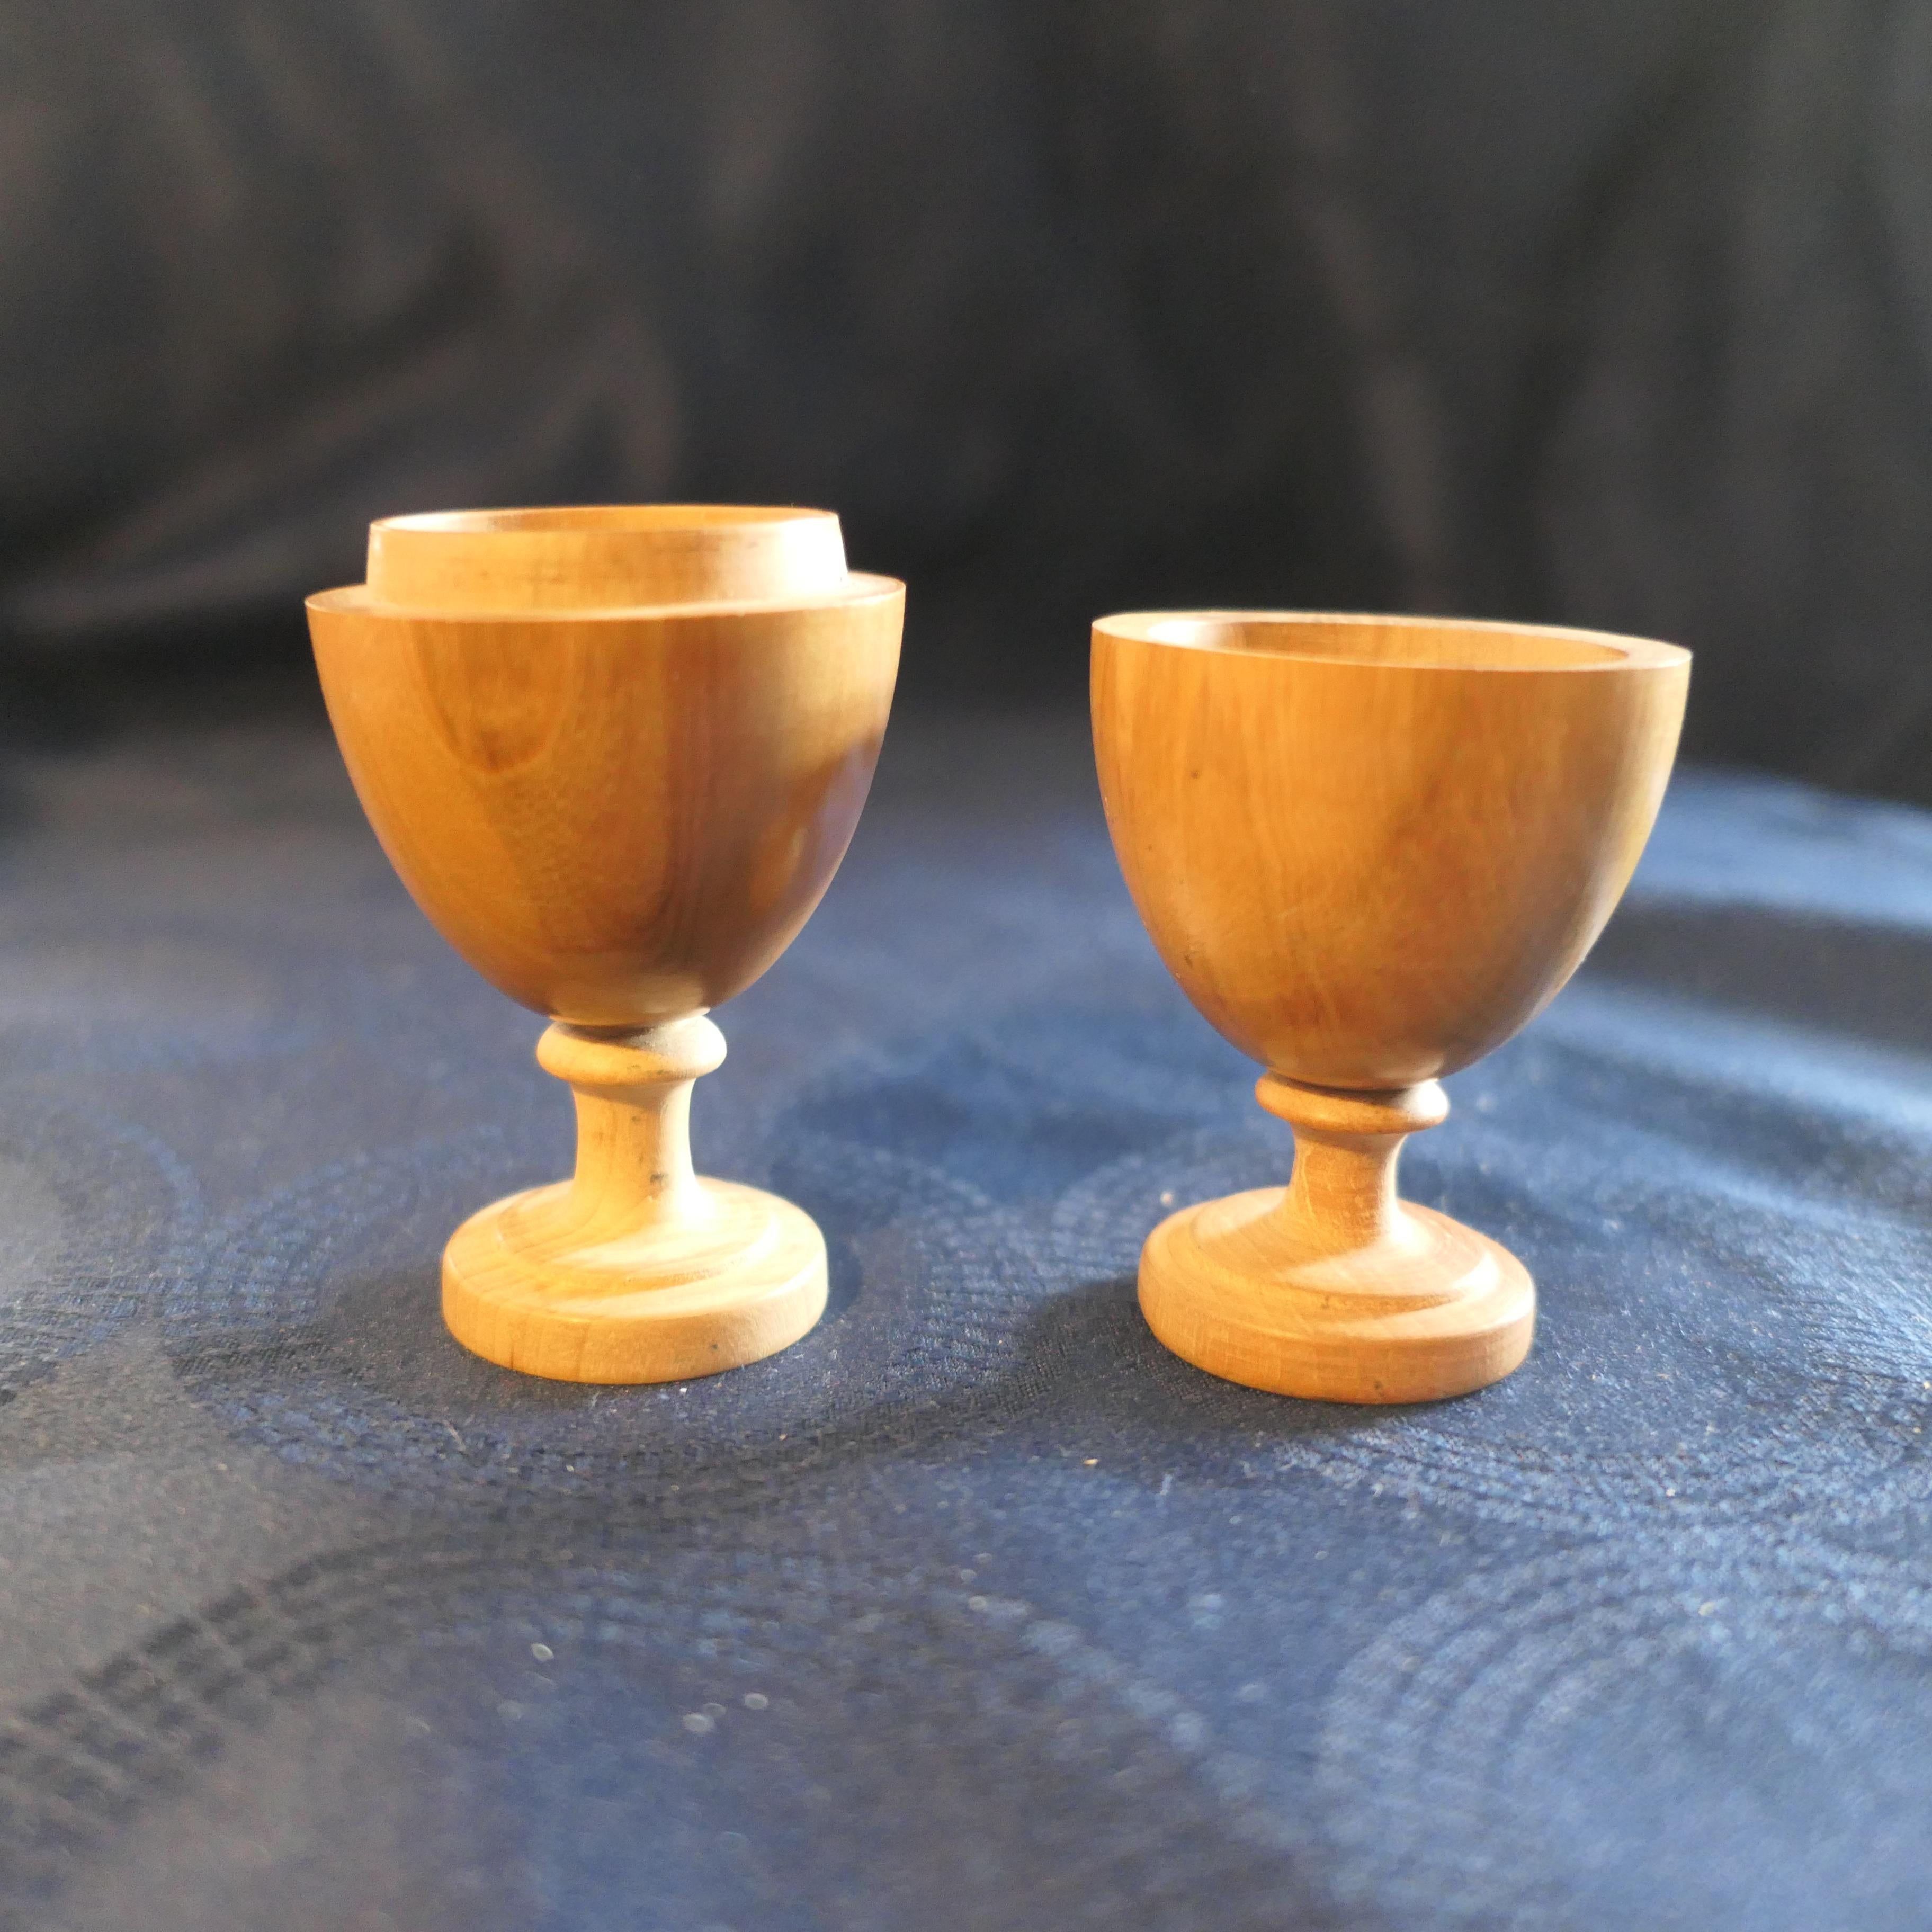 Sycamore A Pair of Collapsable Travelling Treen Egg Cups  What fun, an “egg”  For Sale